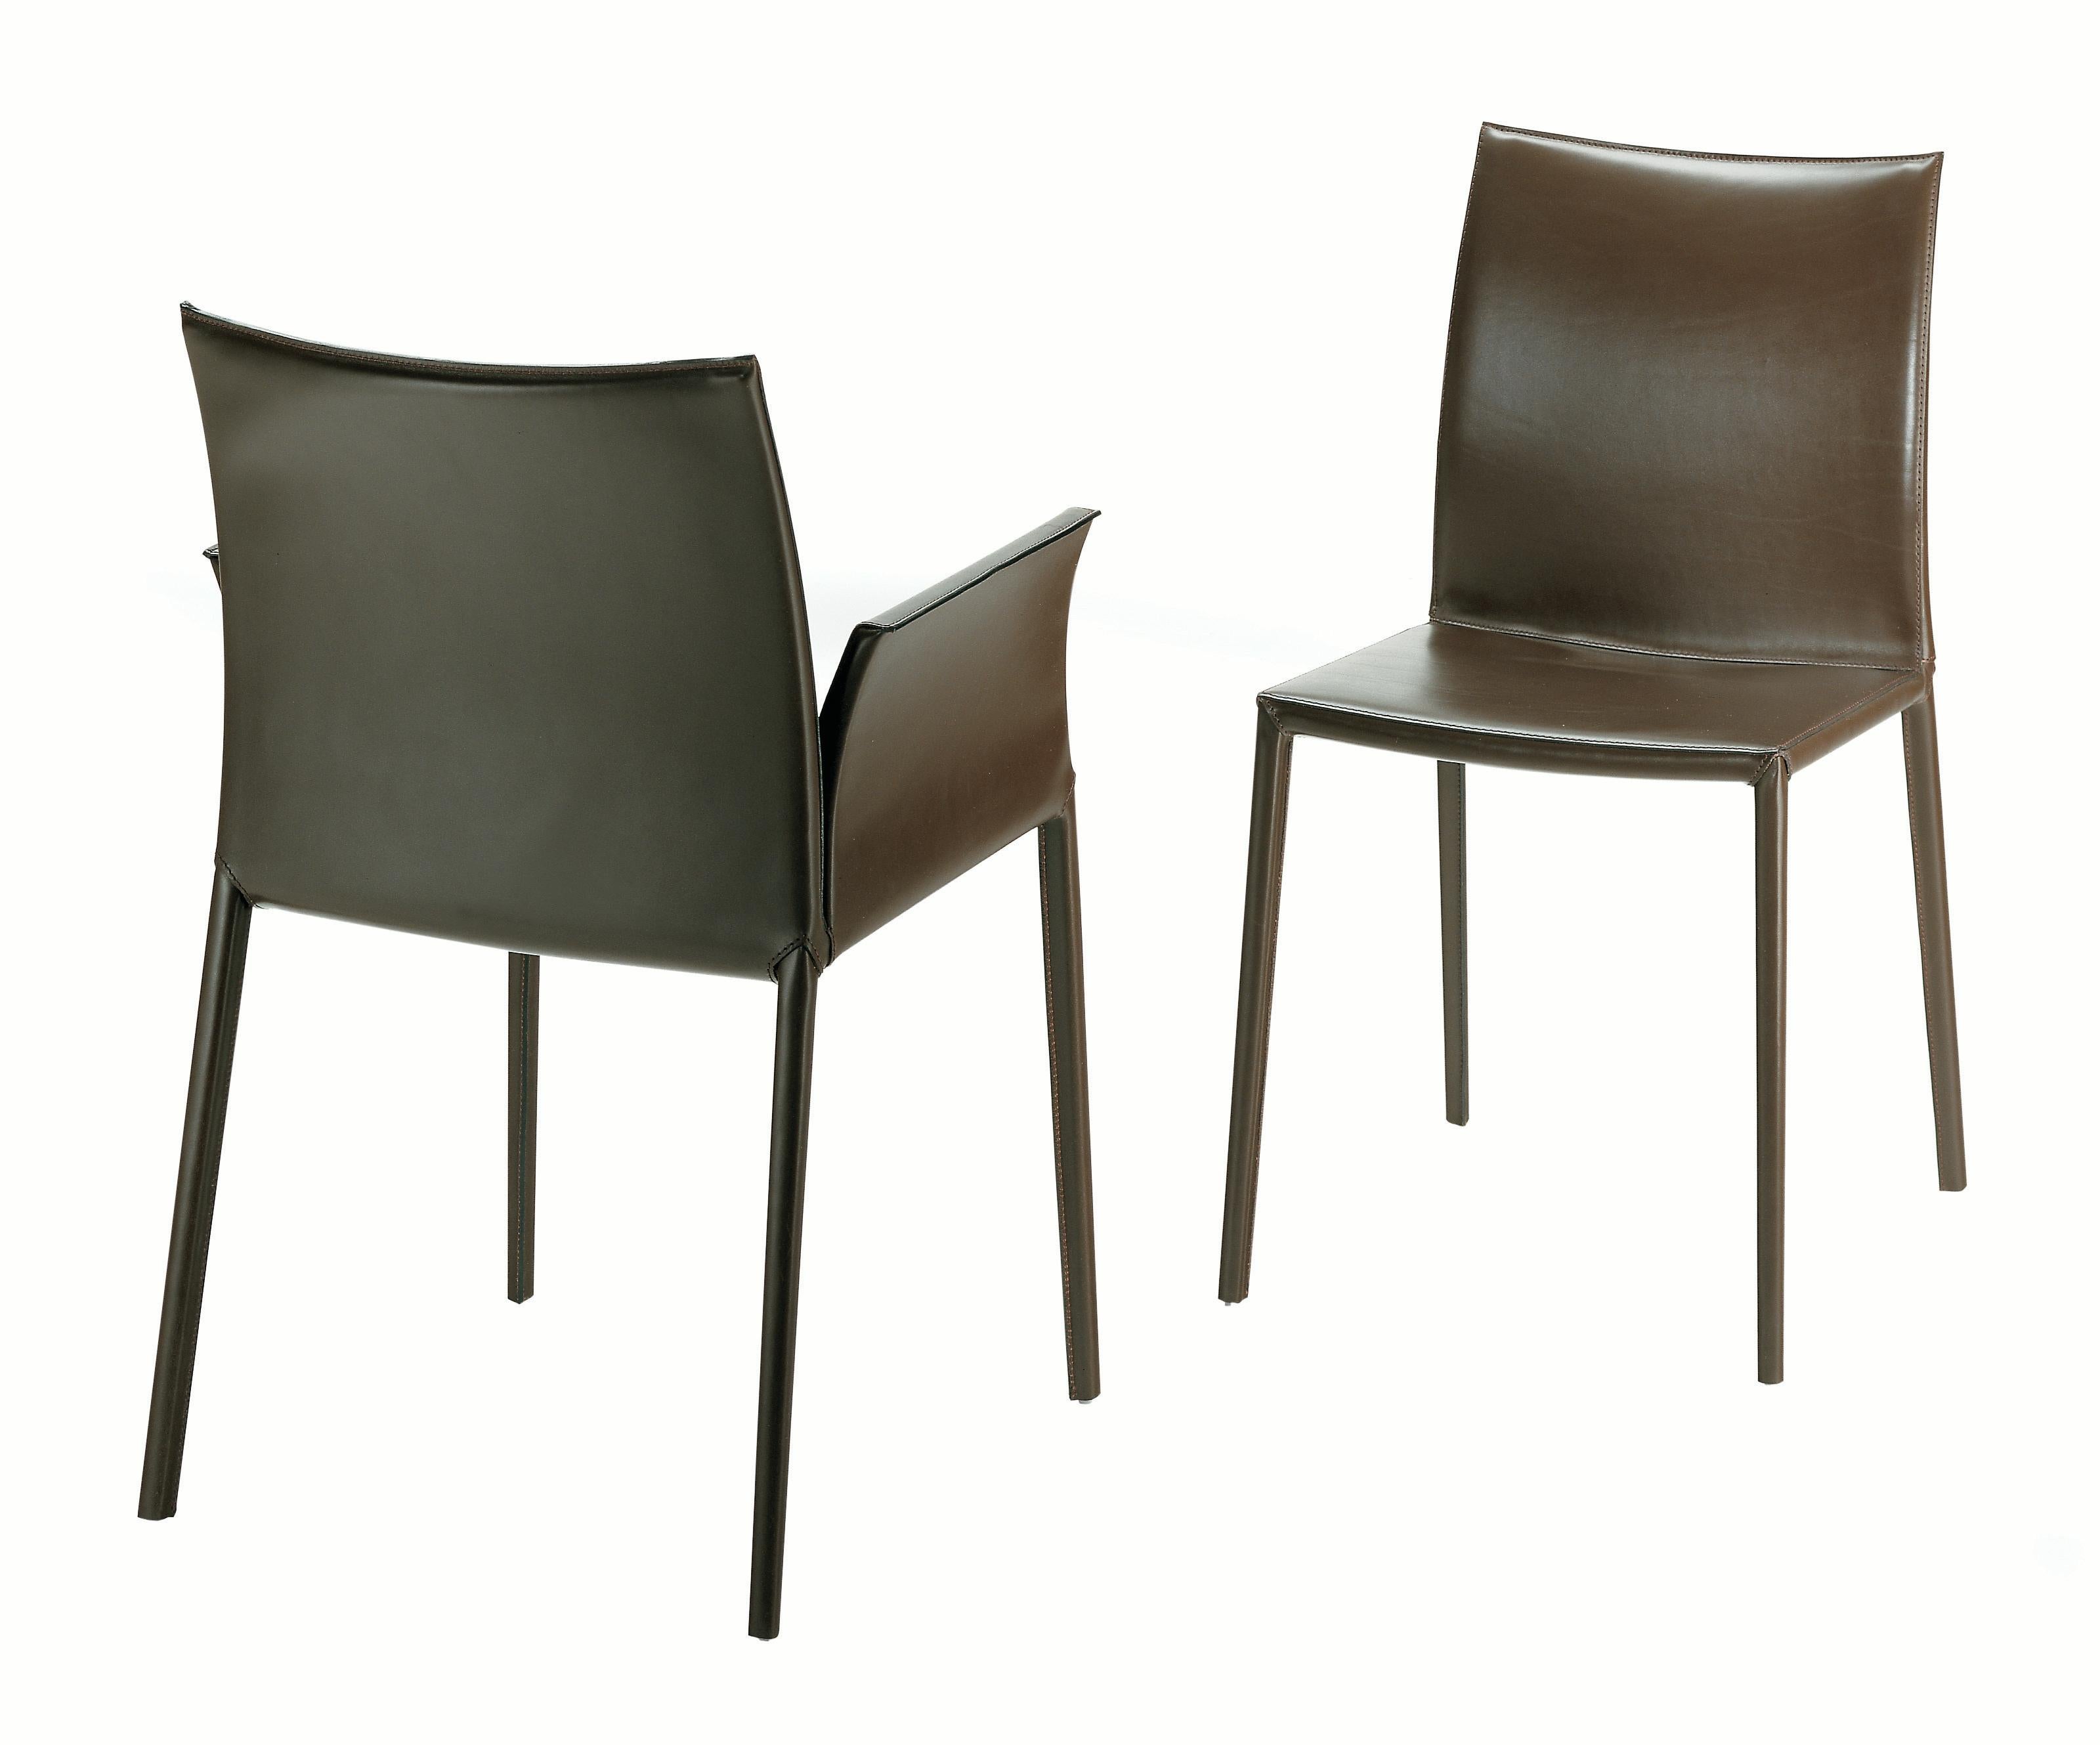 Zanotta Lea Armchair in Brown Cowhide Seat & Legs with Aluminium Frame by Roberto Barbieri

Aluminum alloy frame. Seat, back and armrests upholstered in polyurethane. Fixed internal nylon cover. Removable external cover of the backrest, seat and